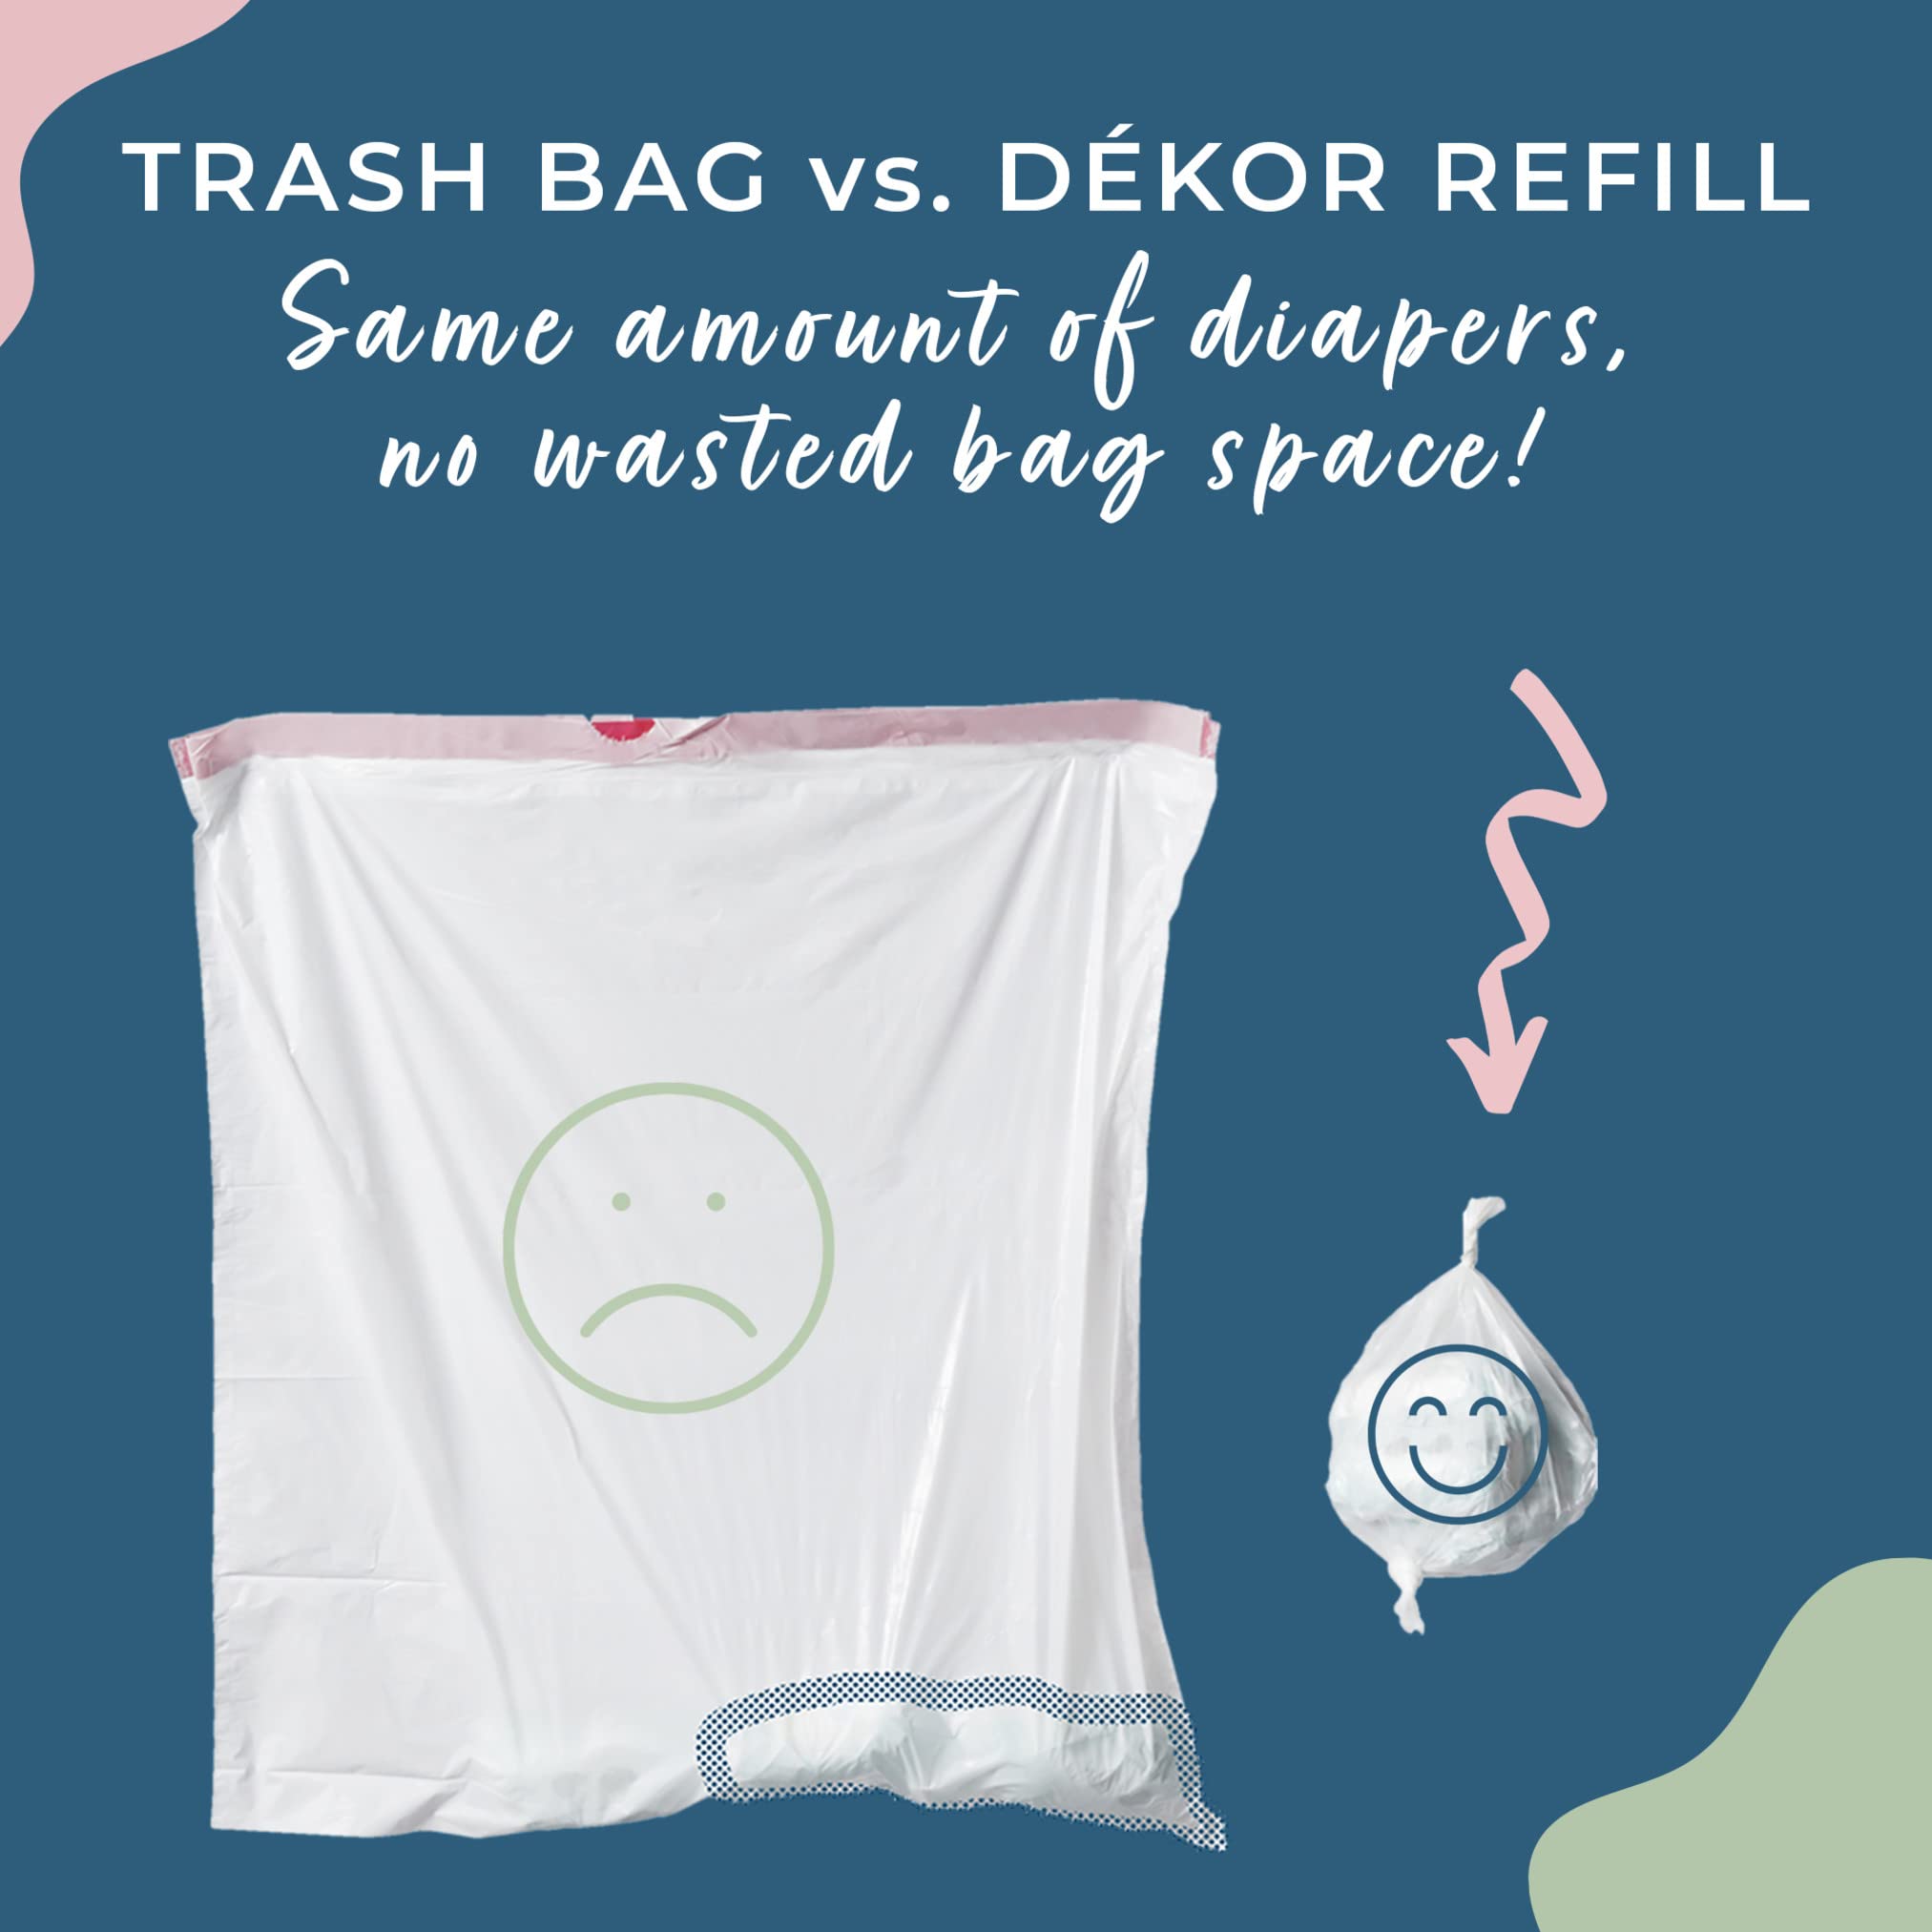 Dekor Plus Hands-Free Diaper Pail | White | Easiest to Use | Just Step – Drop – Done | Doesn’t Absorb Odors | 20 Second Bag Change | Most Economical Refill System |Great for Cloth Diapers